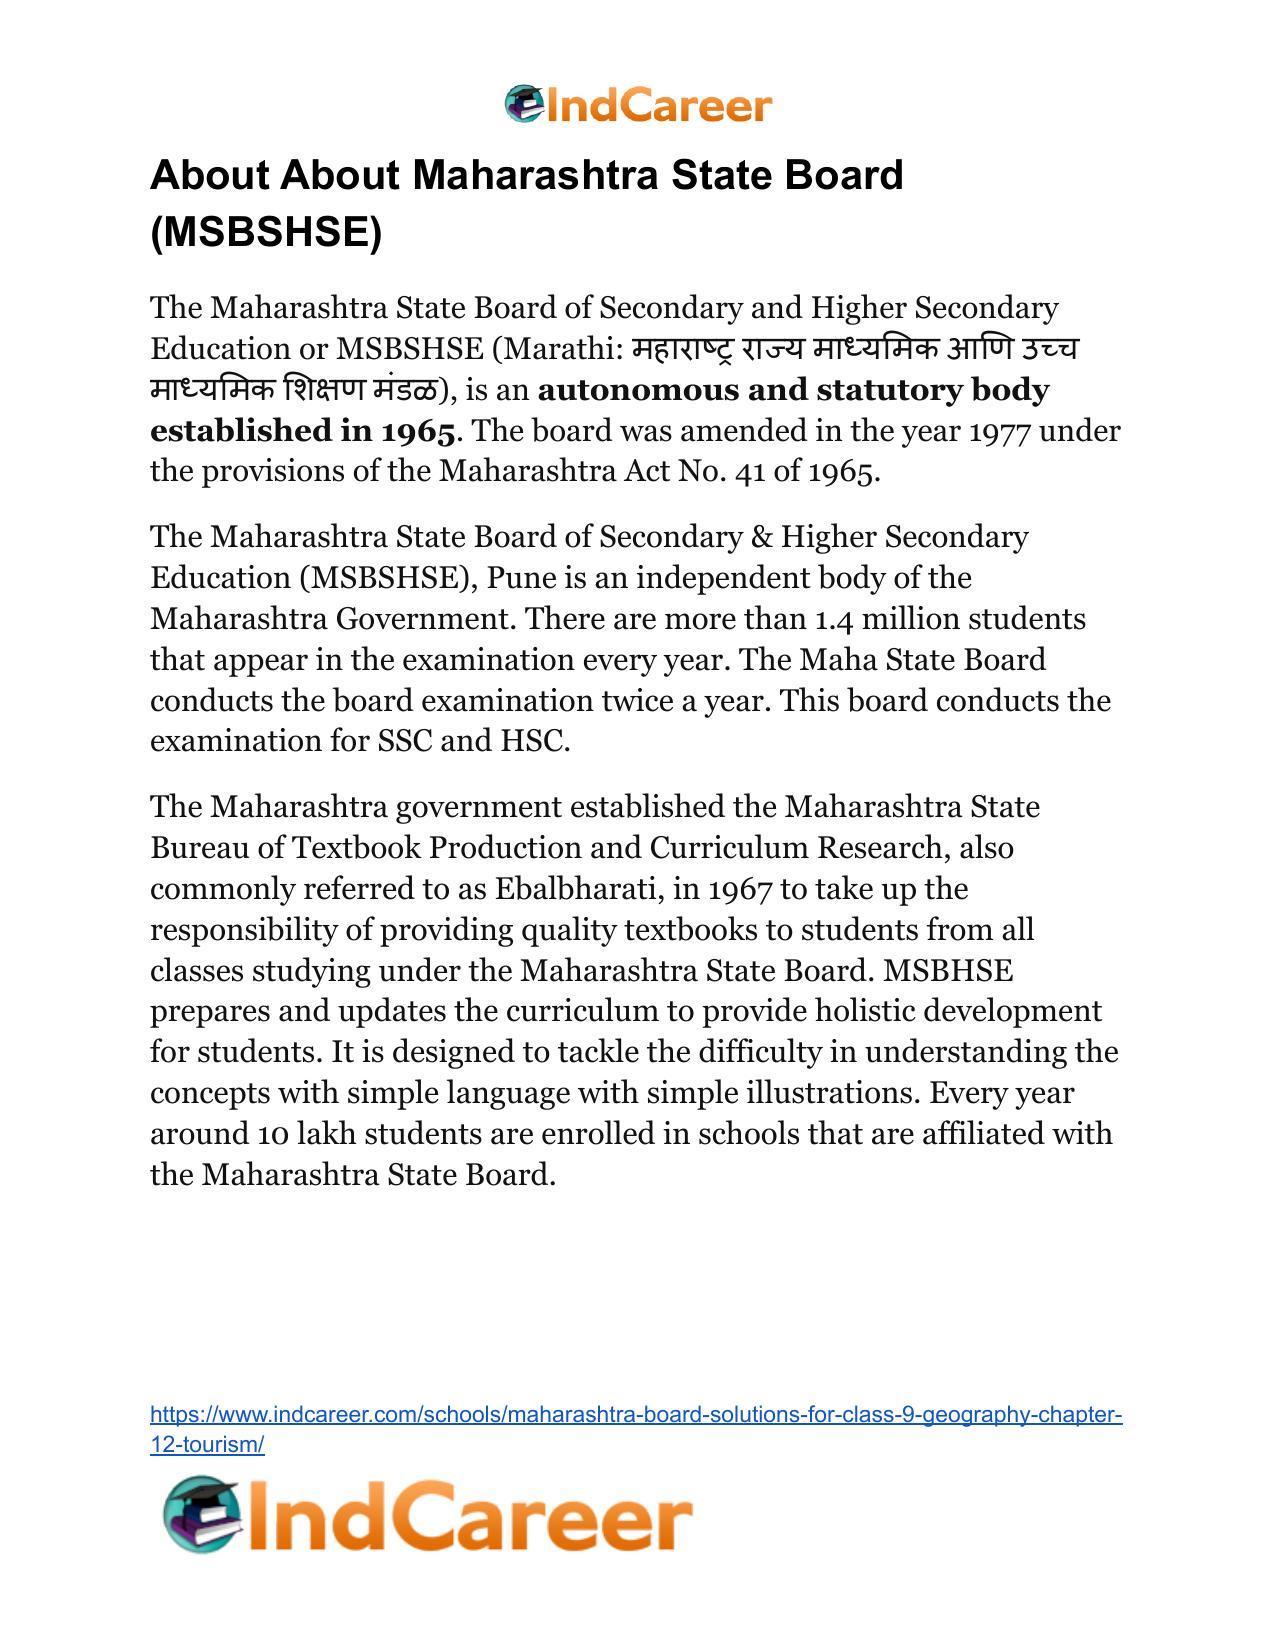 Maharashtra Board Solutions for Class 9- Geography: Chapter 12- Tourism - Page 37